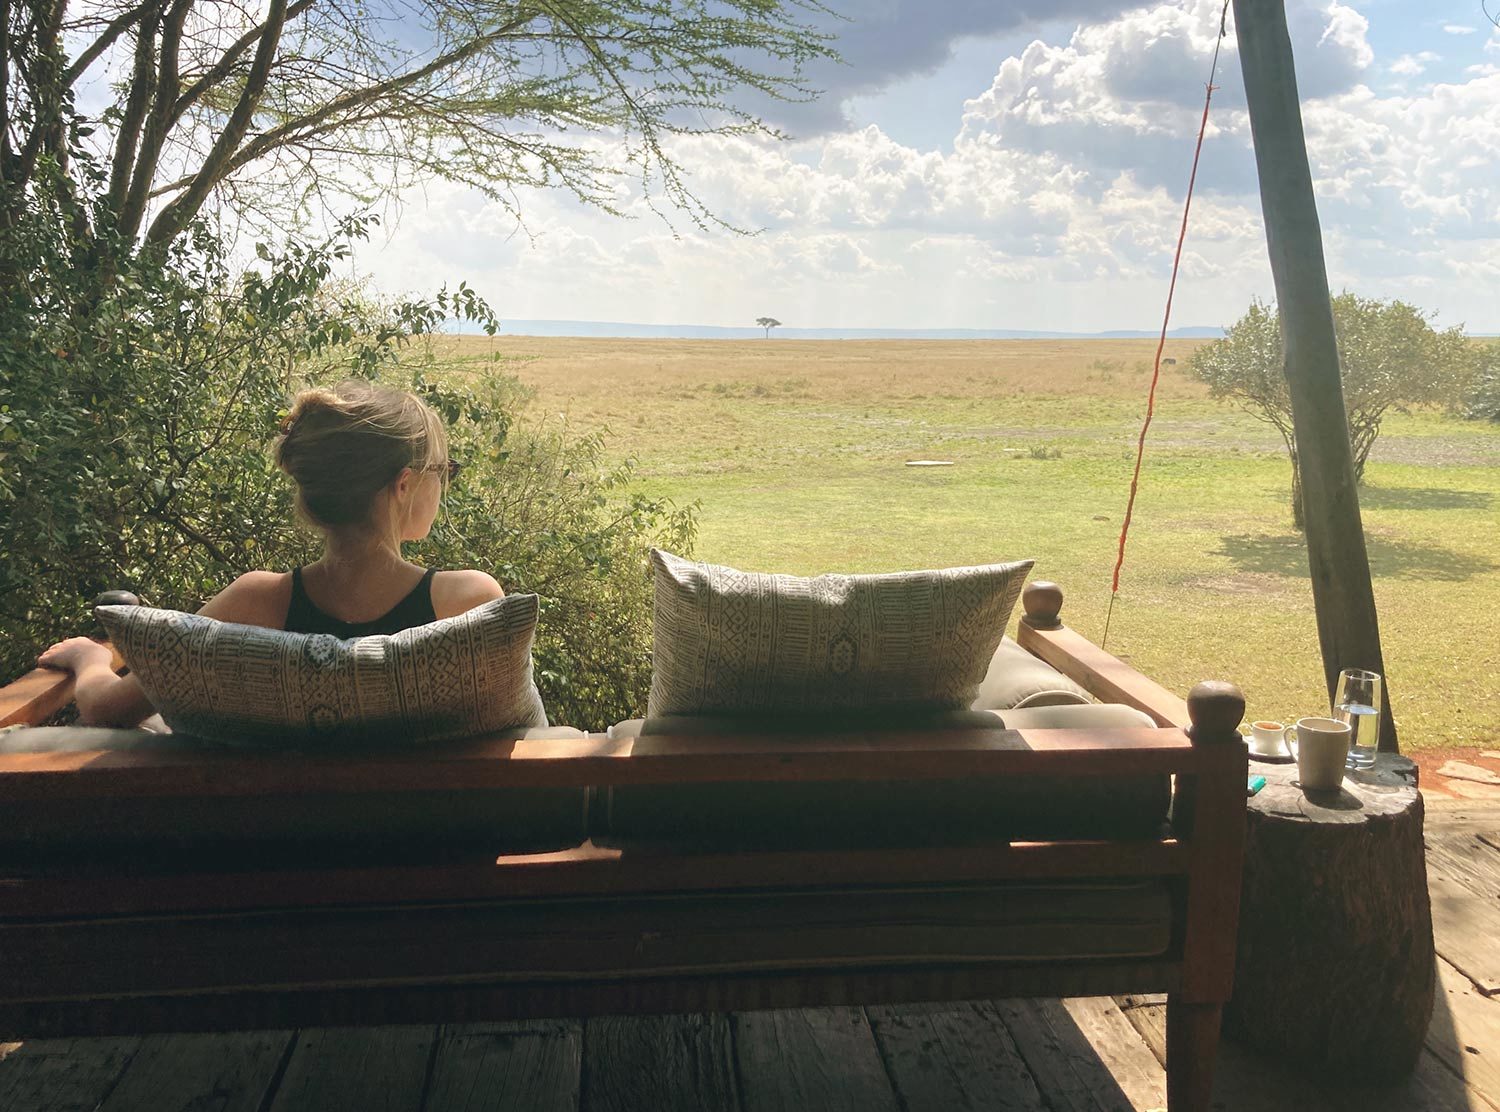 Mara Plains Camp Drinking a coffee while spotting wildlife  